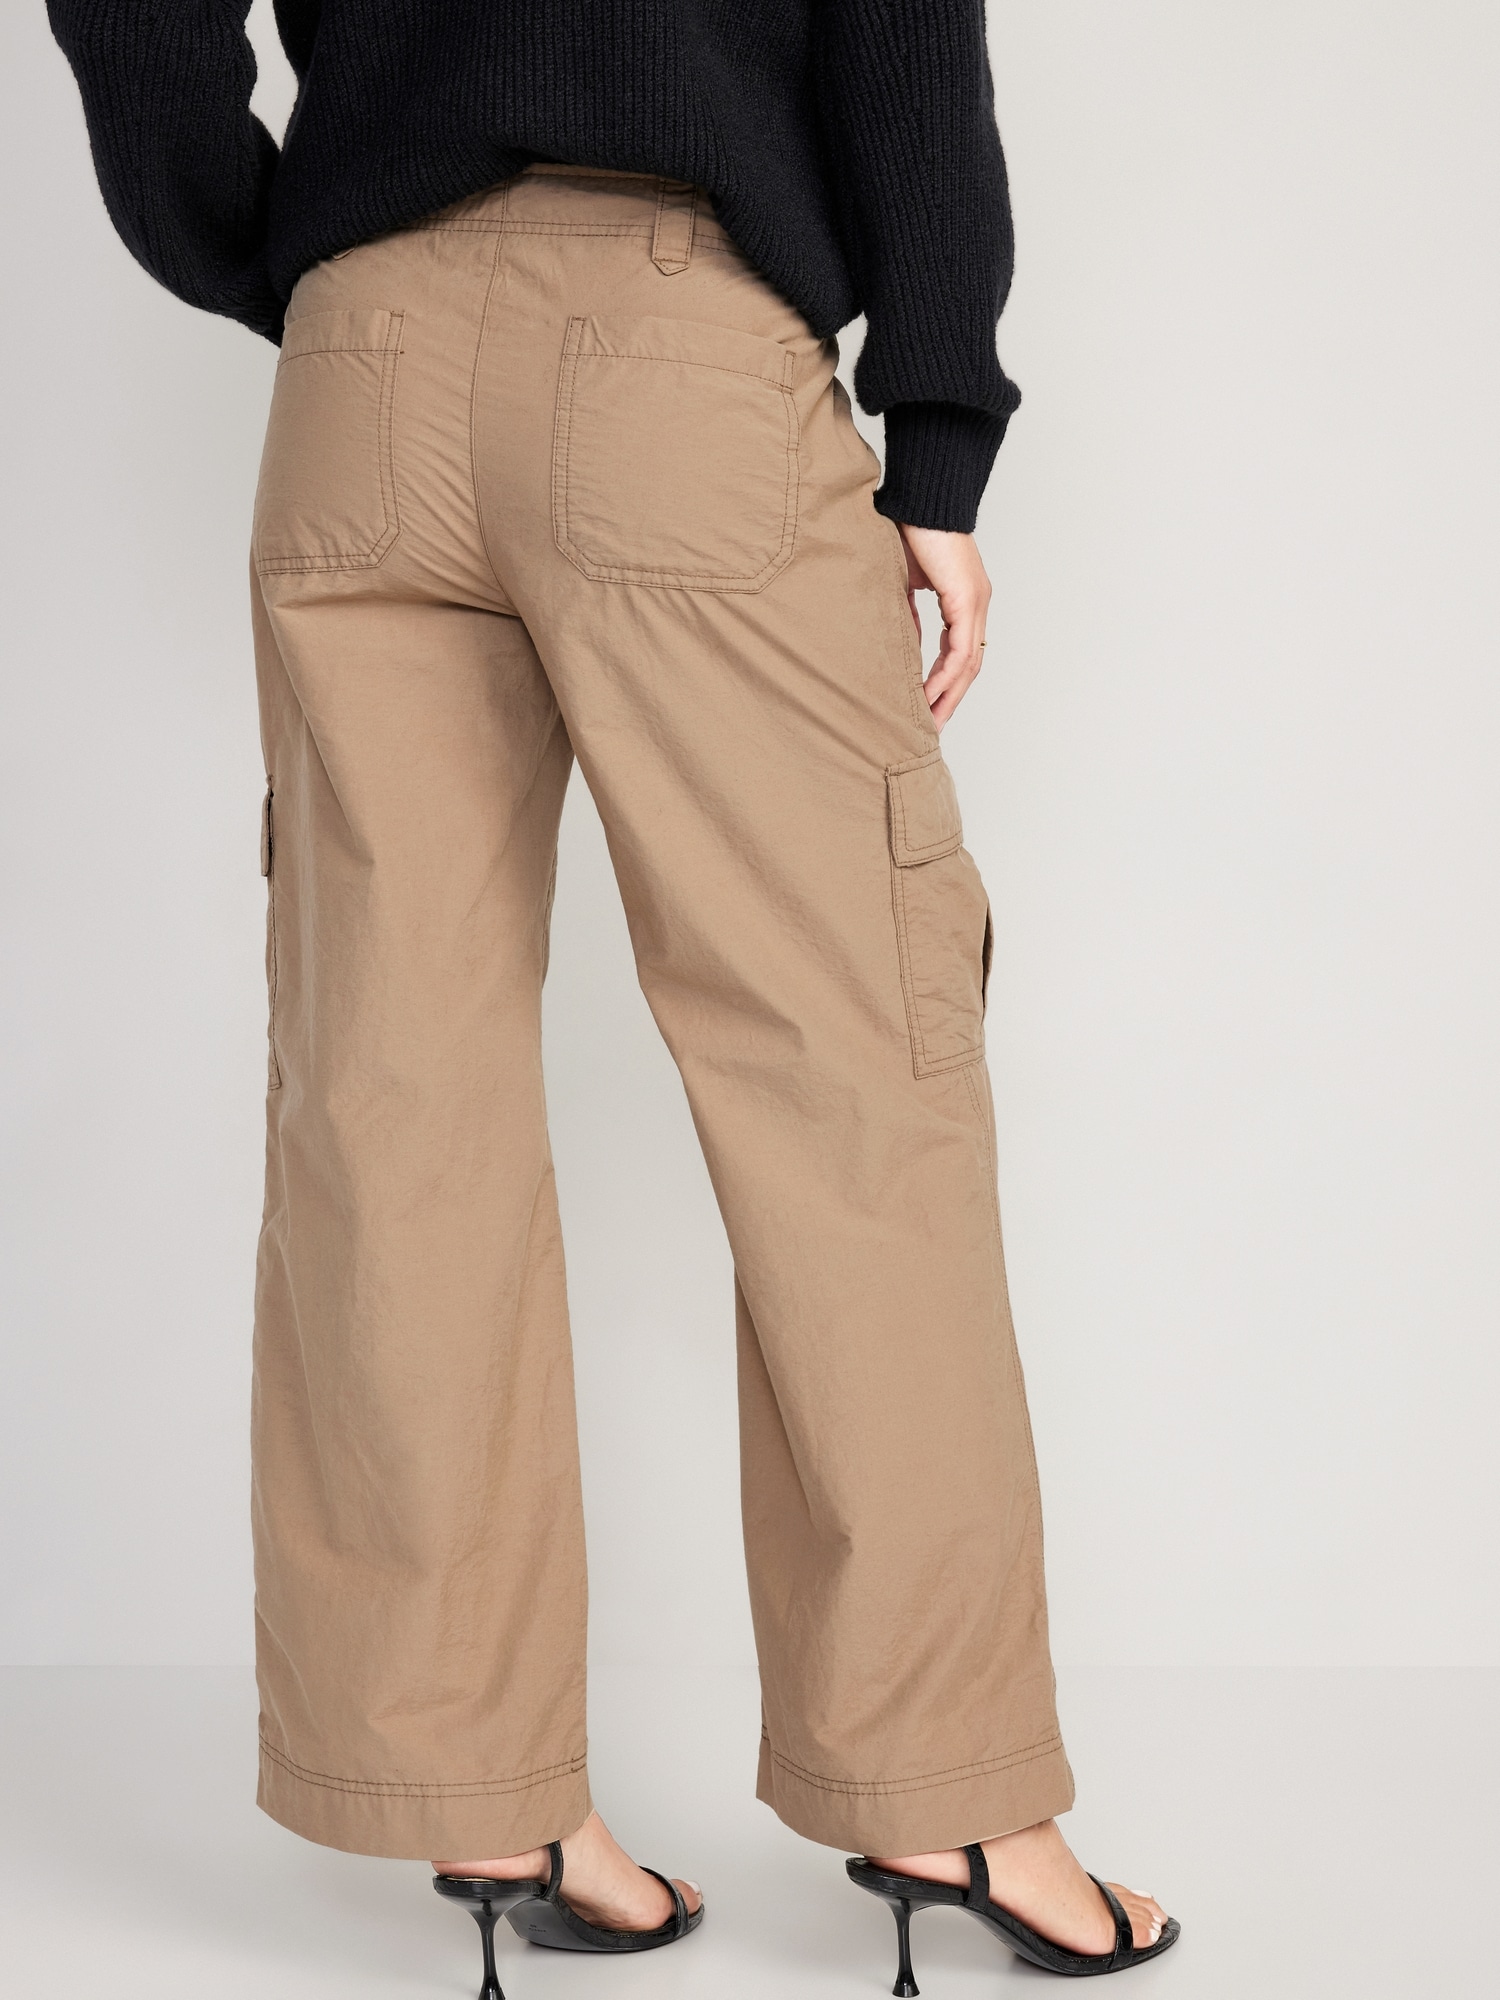 Womens Pants Casual Solid Cotton Trousers Elastic Band Loose Wide Leg Cargo  Pants 